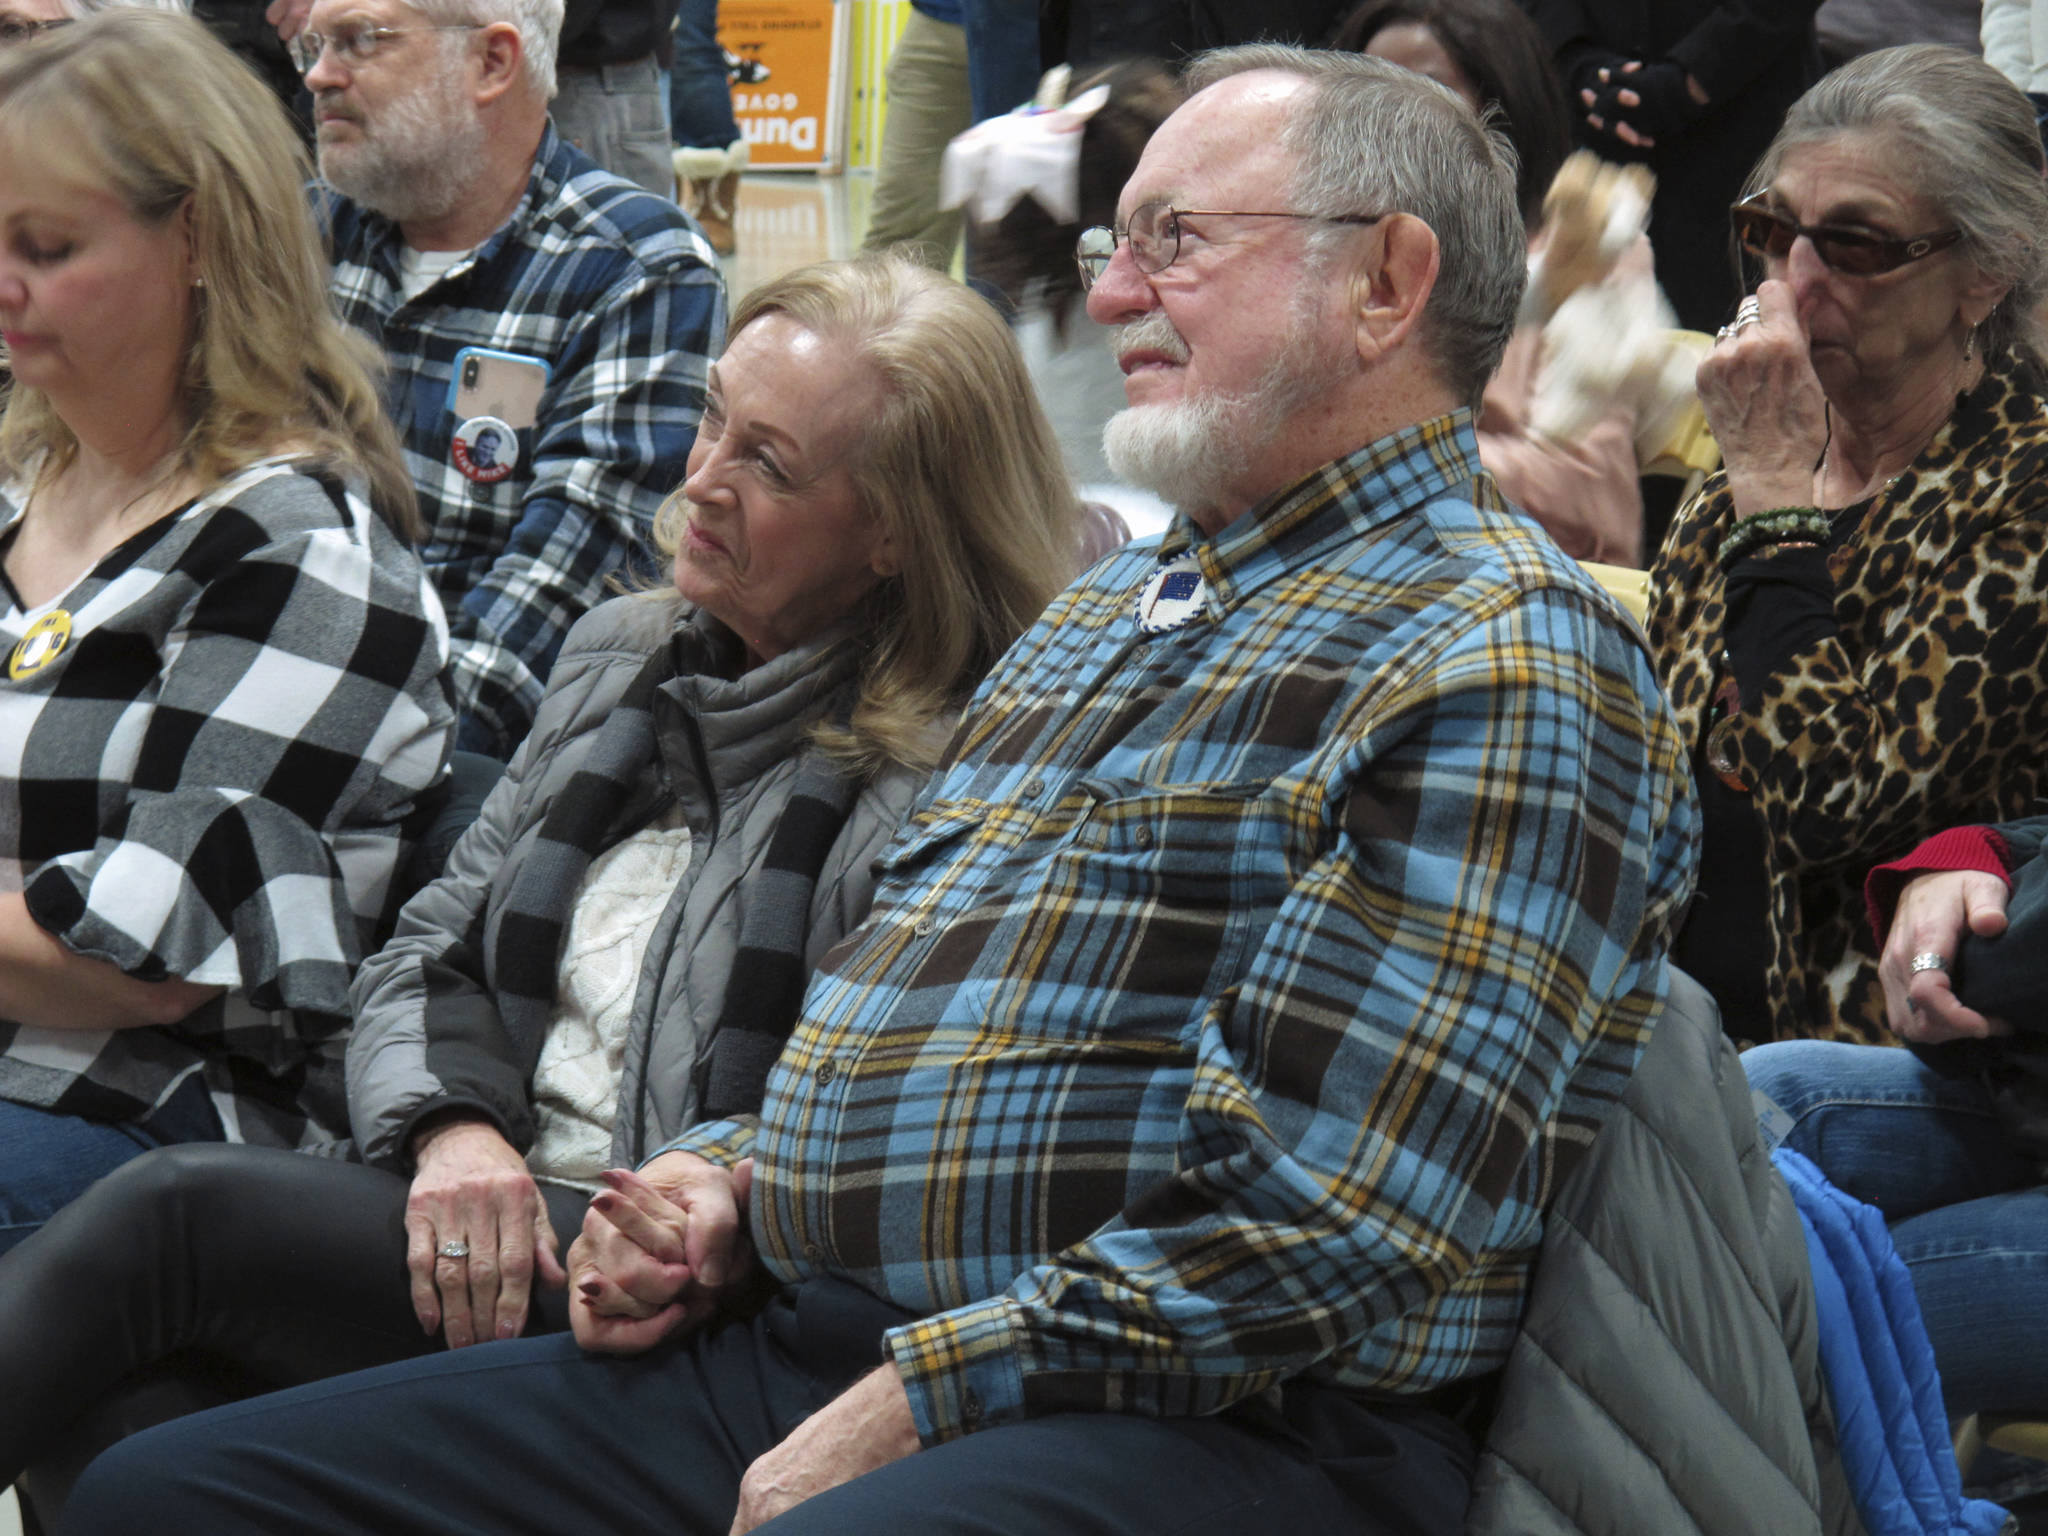 Alaska U.S. Rep. Don Young holds hands with his wife, Anne Garland Walton, during a GOP rally in Anchorage, Alaska, Sunday, Nov. 4, 2018. Young, they longest-serving current member of the U.S. House, beat challenger Alyse Galvin on Tuesday. (AP Photo/Becky Bohrer)